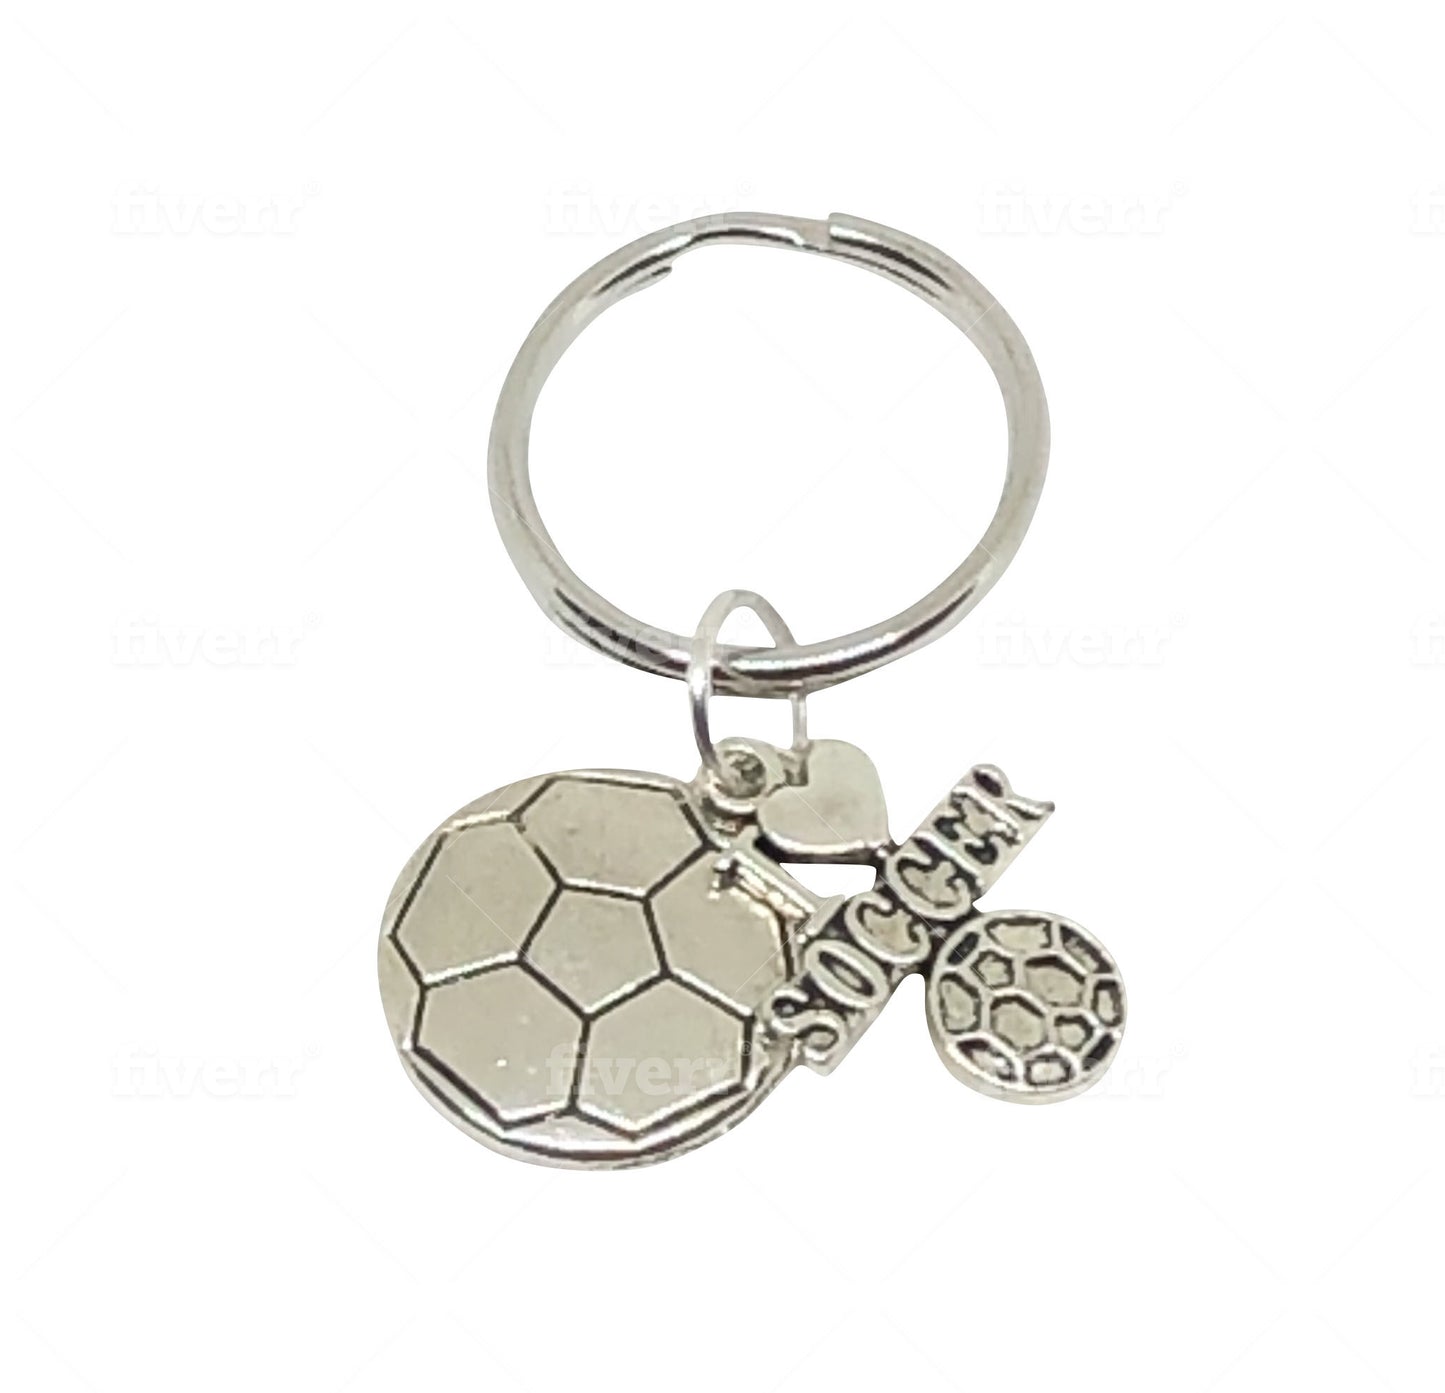 Soccer Keychain - Soccer Accessories - Cheer and Dance On Demand